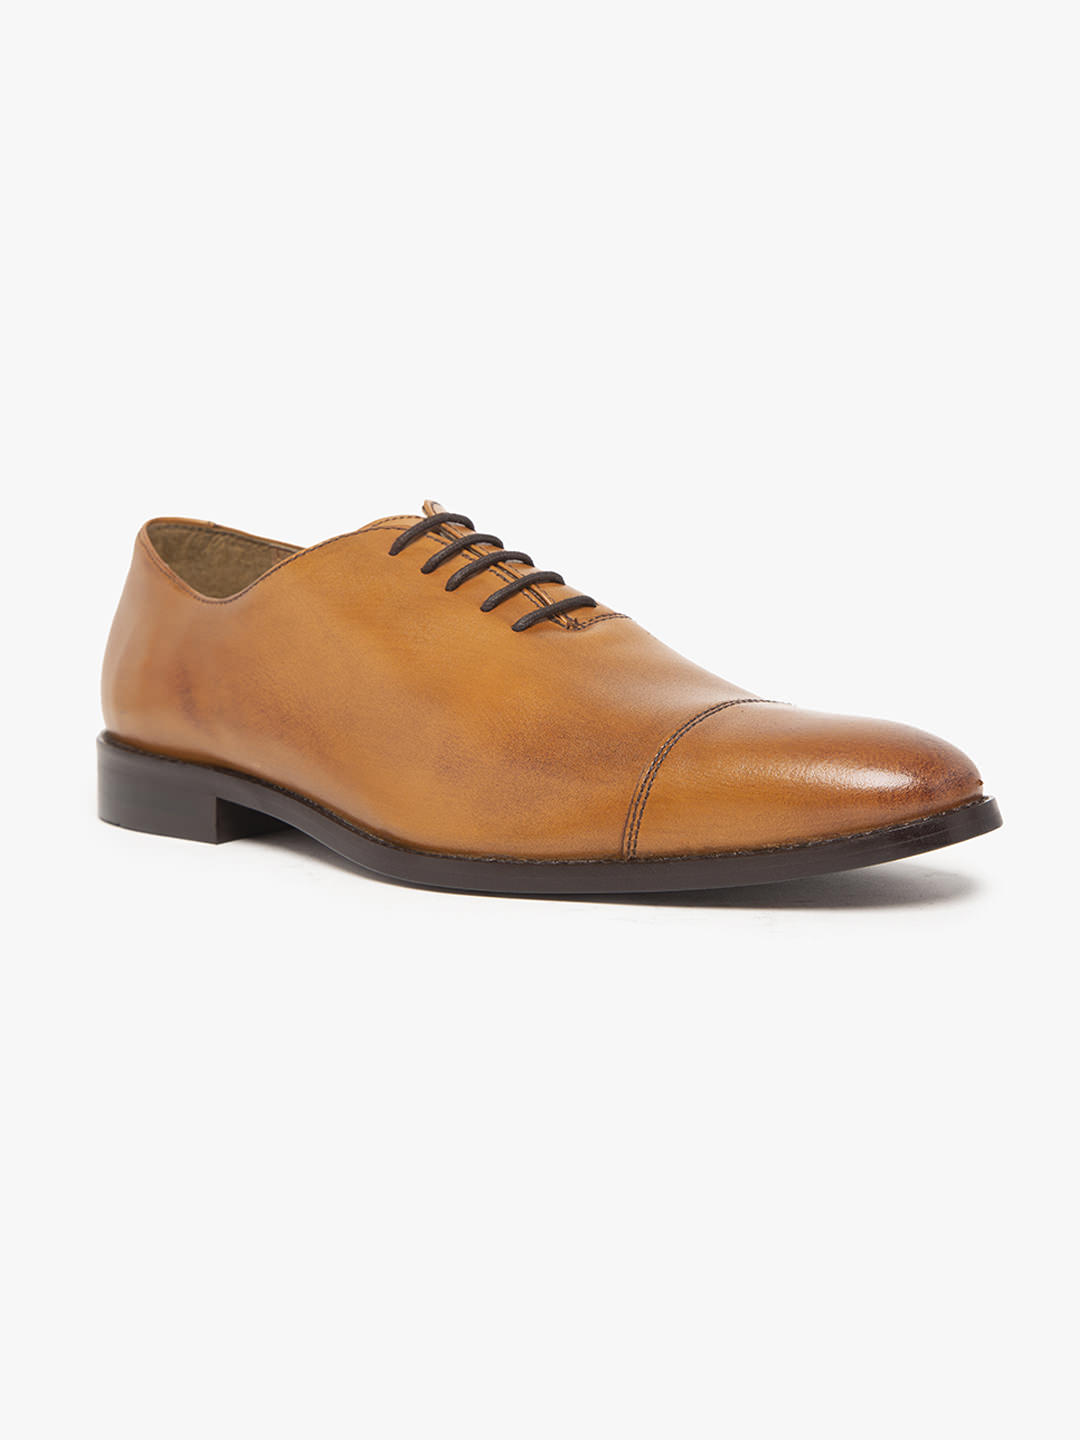 Genuine Leather Tan Oxford Shoes 